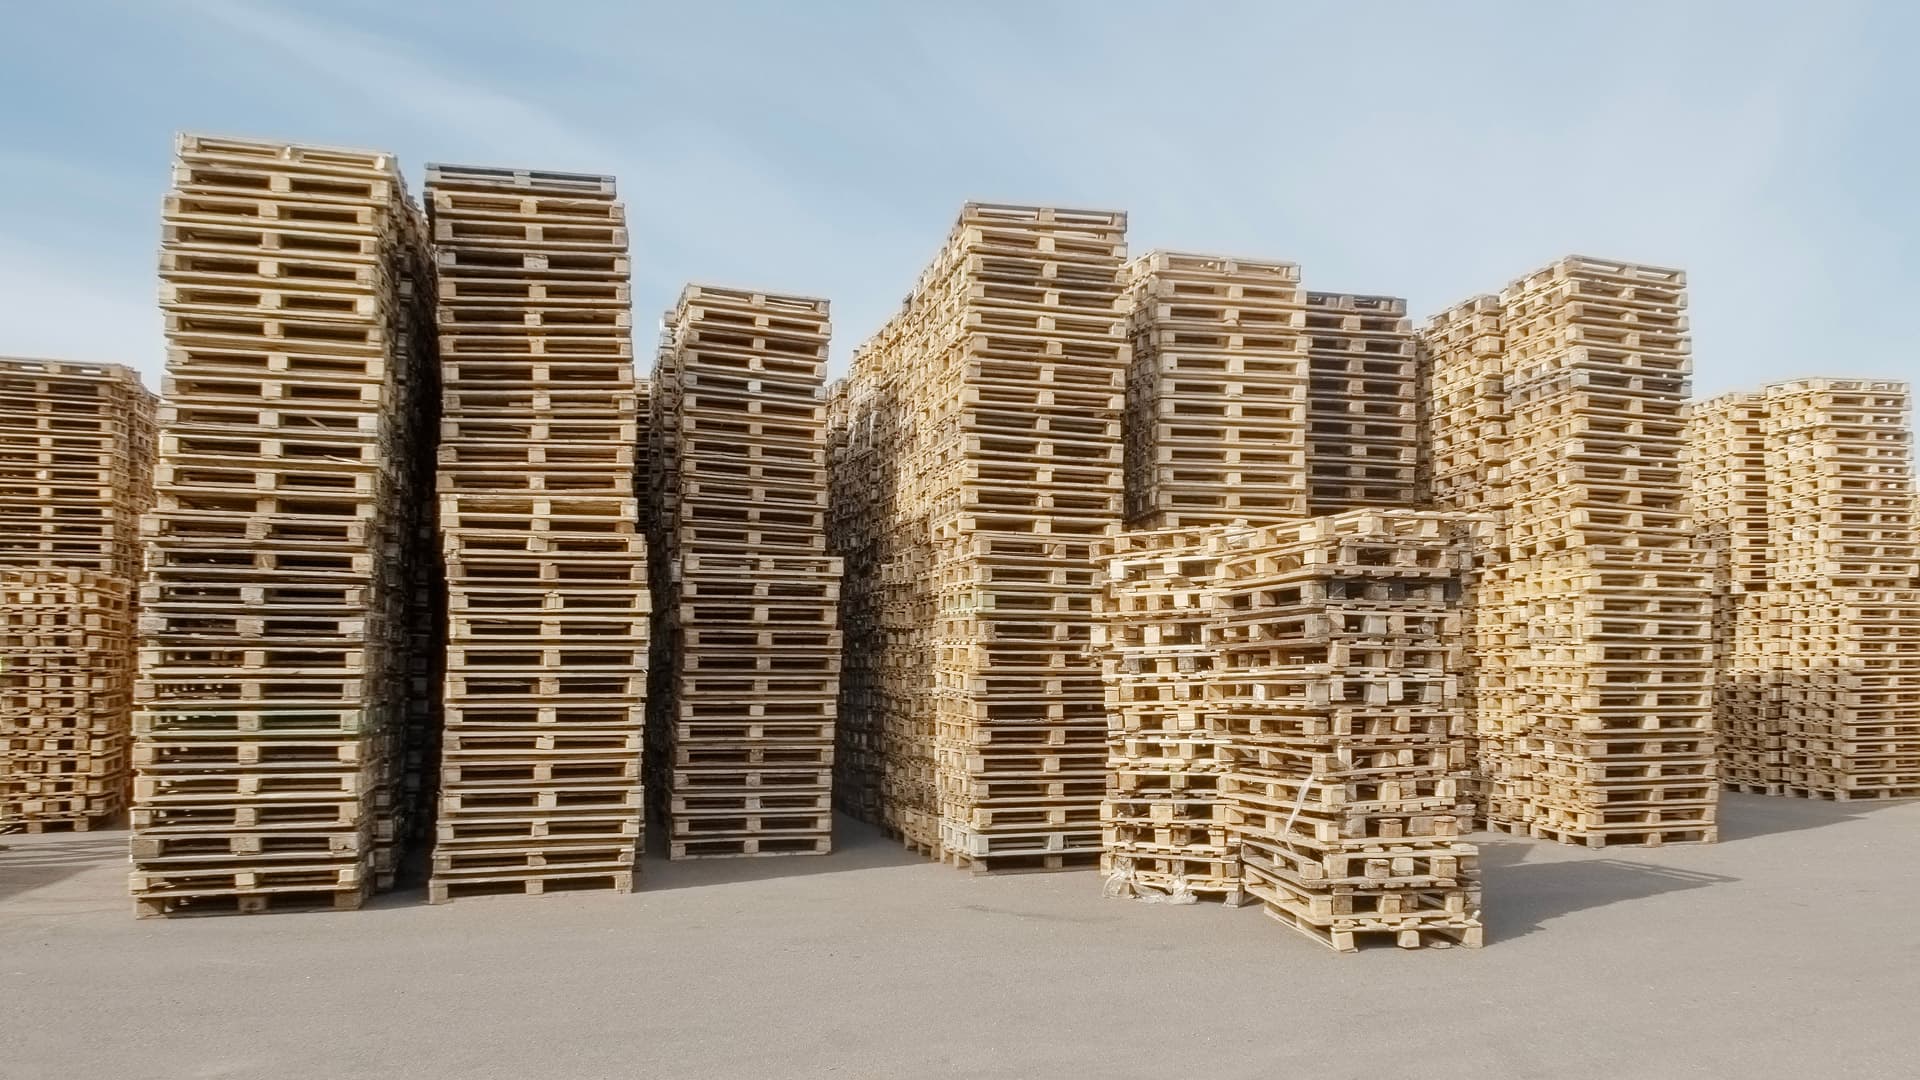 New pallets with custom pallet design